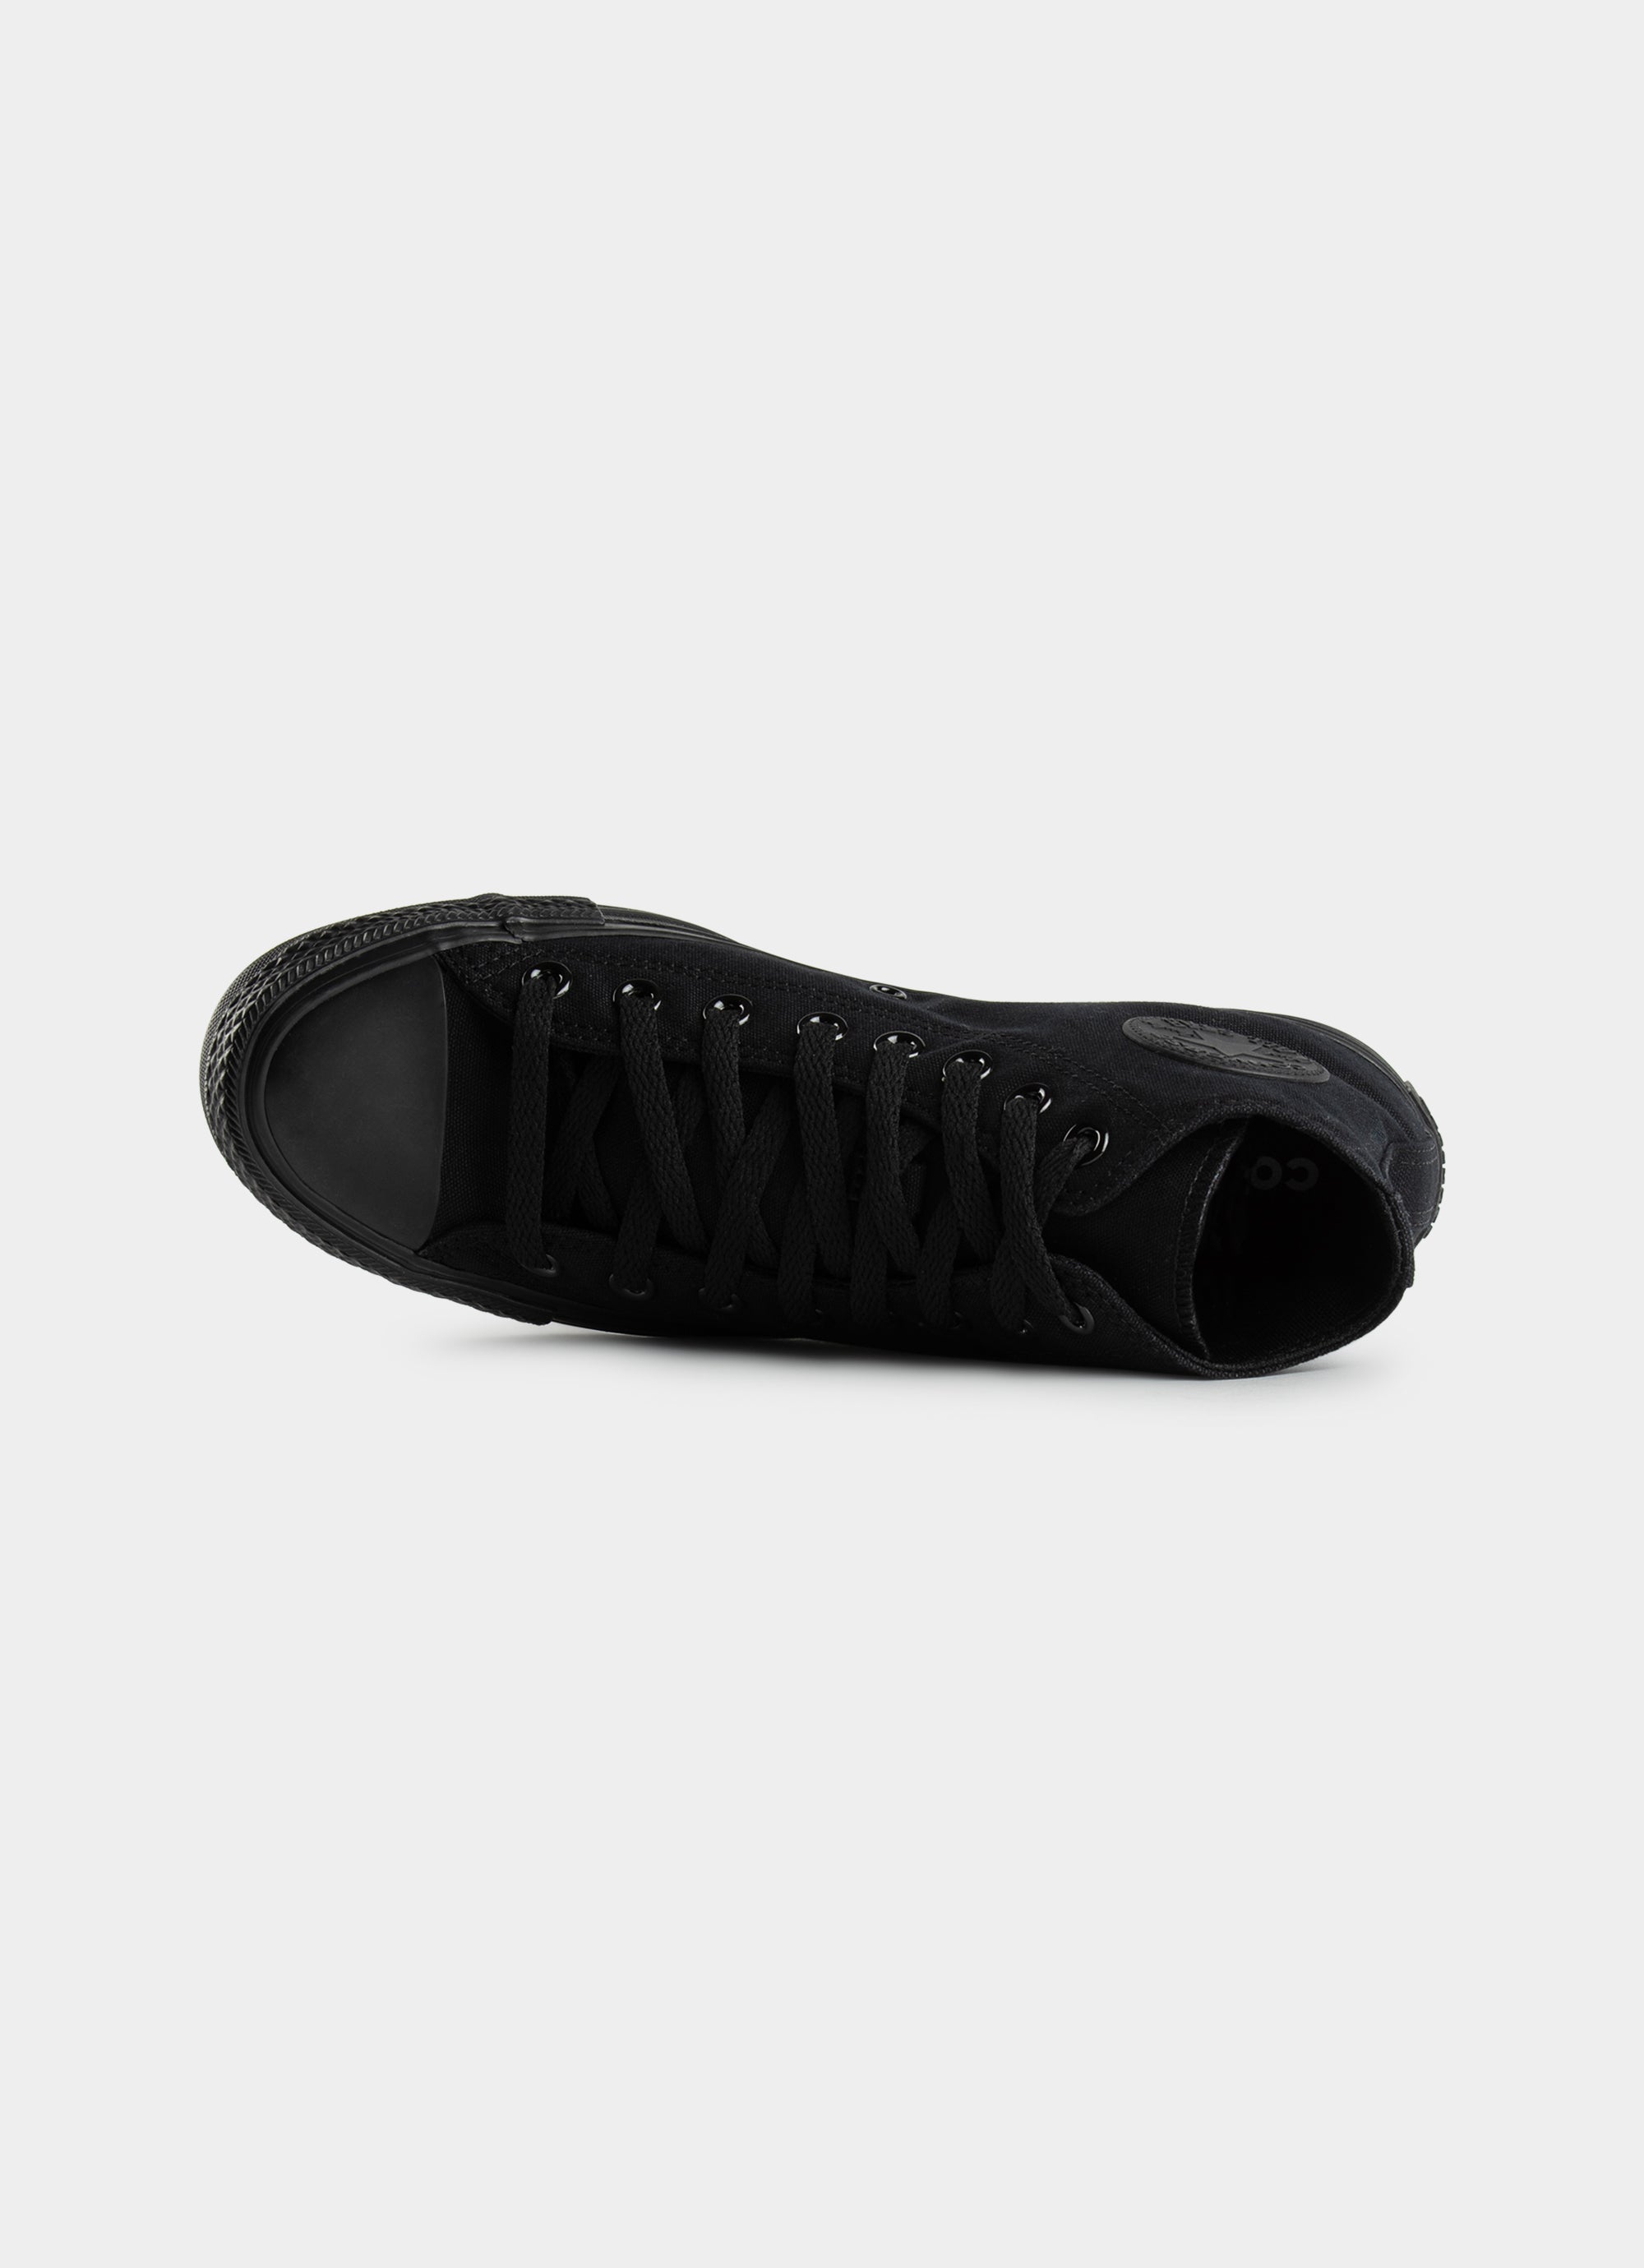 Converse Star High Monochrome Shoe in Unknown | Red Rat